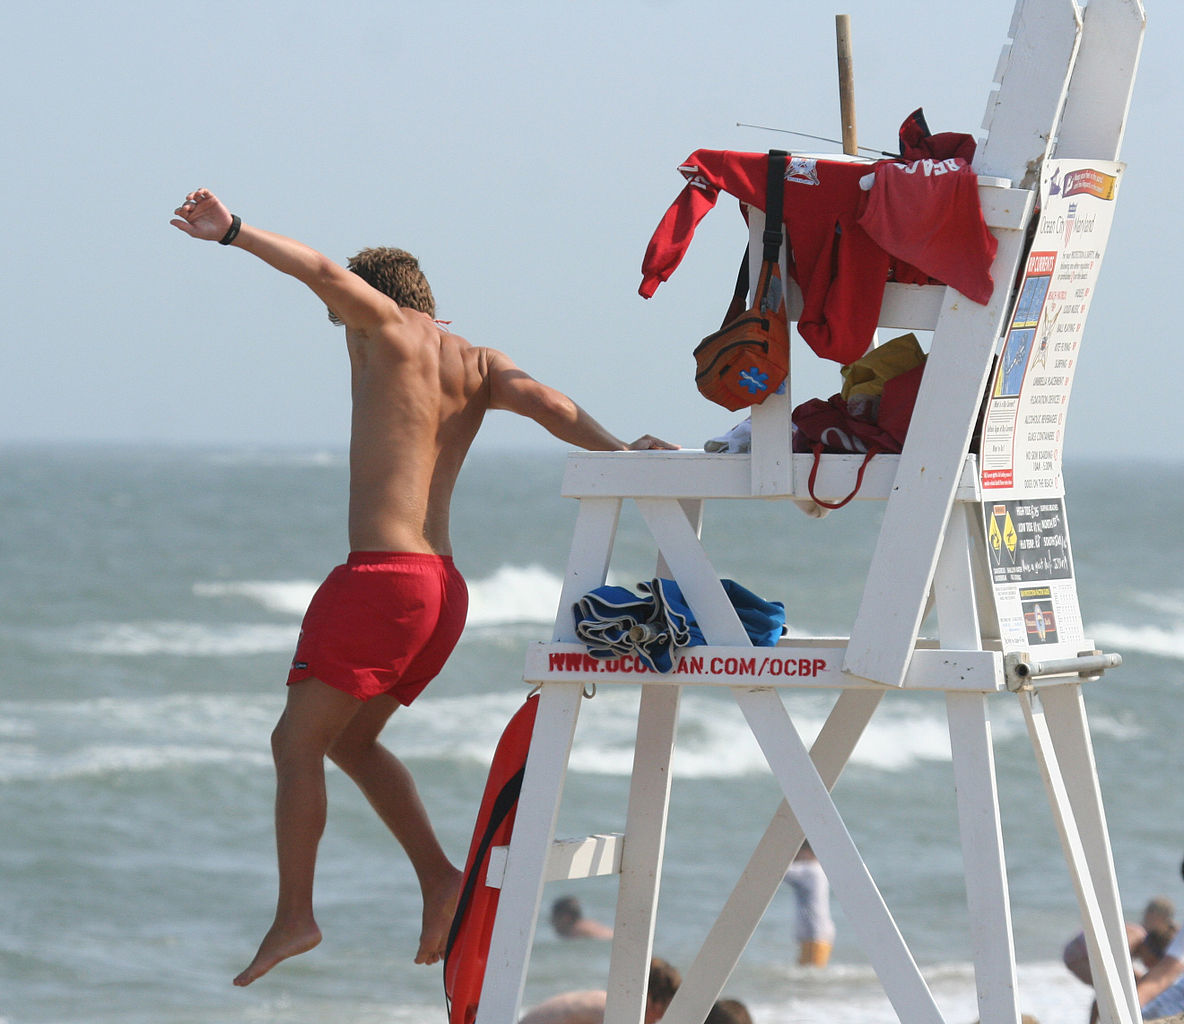 How Often Do Lifeguards Have To Save Someone?